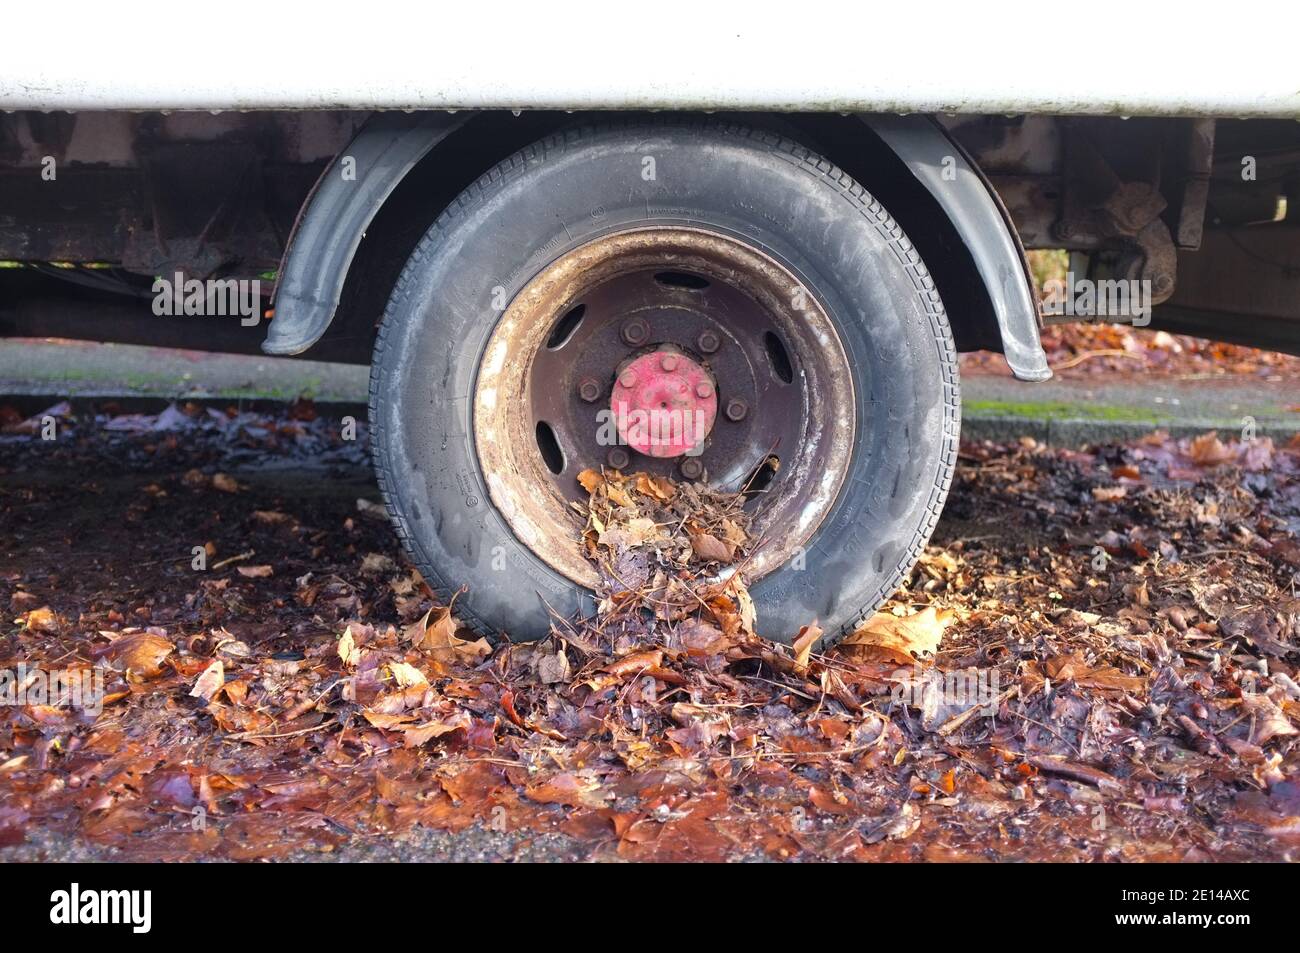 An idle van which has not moved for so long the fallen leaves have surrounded it. 2020 Stock Photo